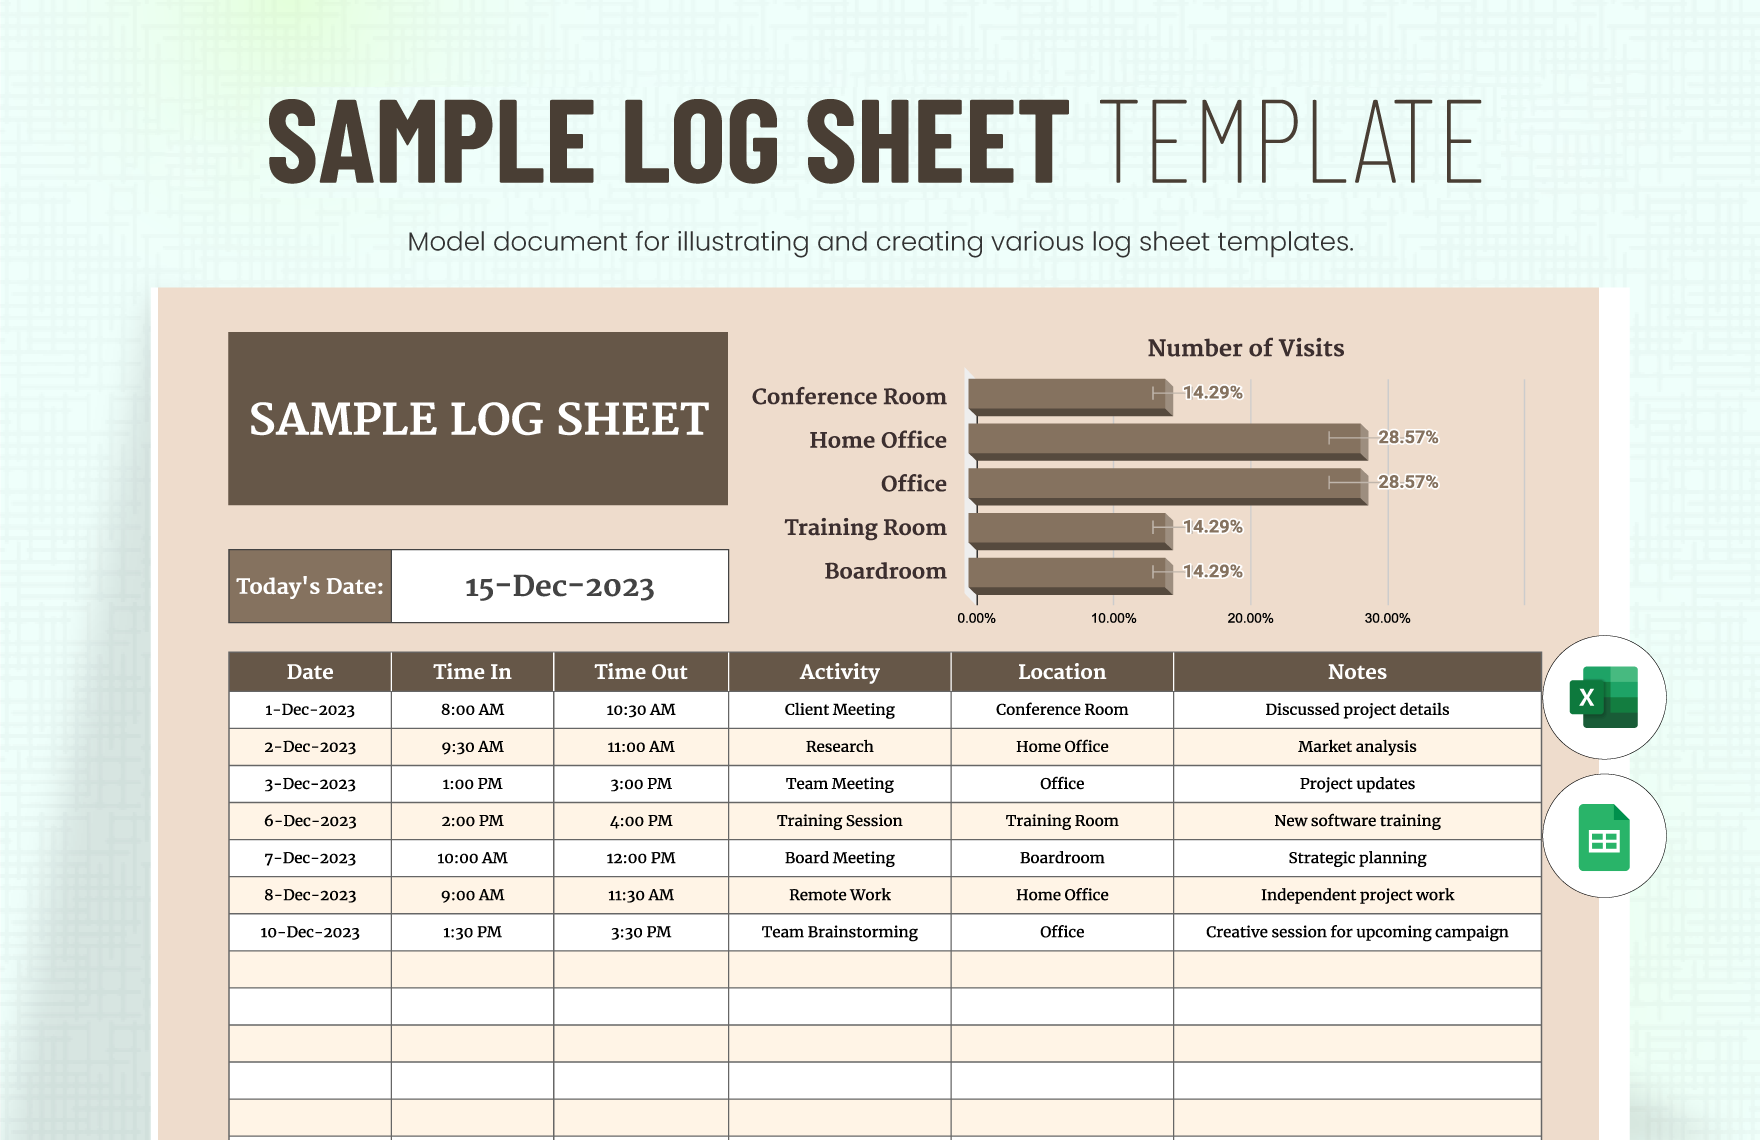 Free Sample Log Sheet Template in Excel, Google Sheets